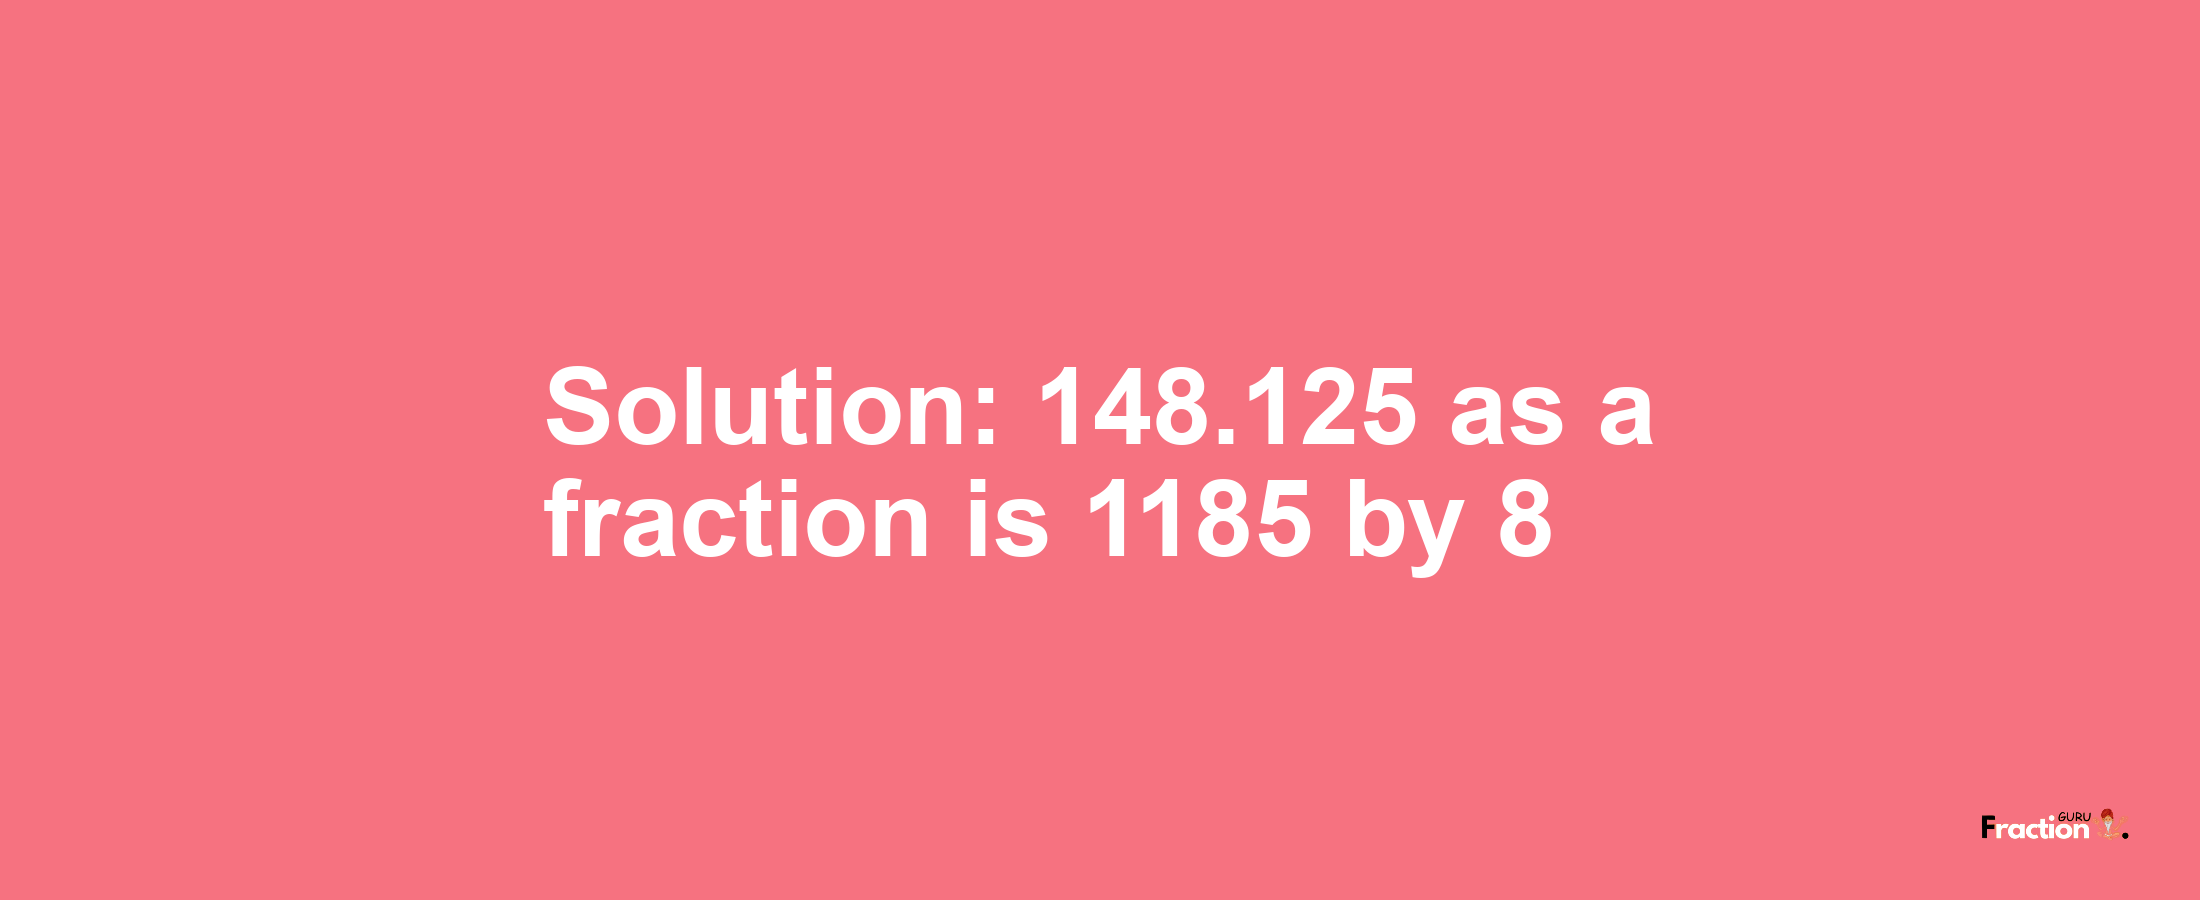 Solution:148.125 as a fraction is 1185/8